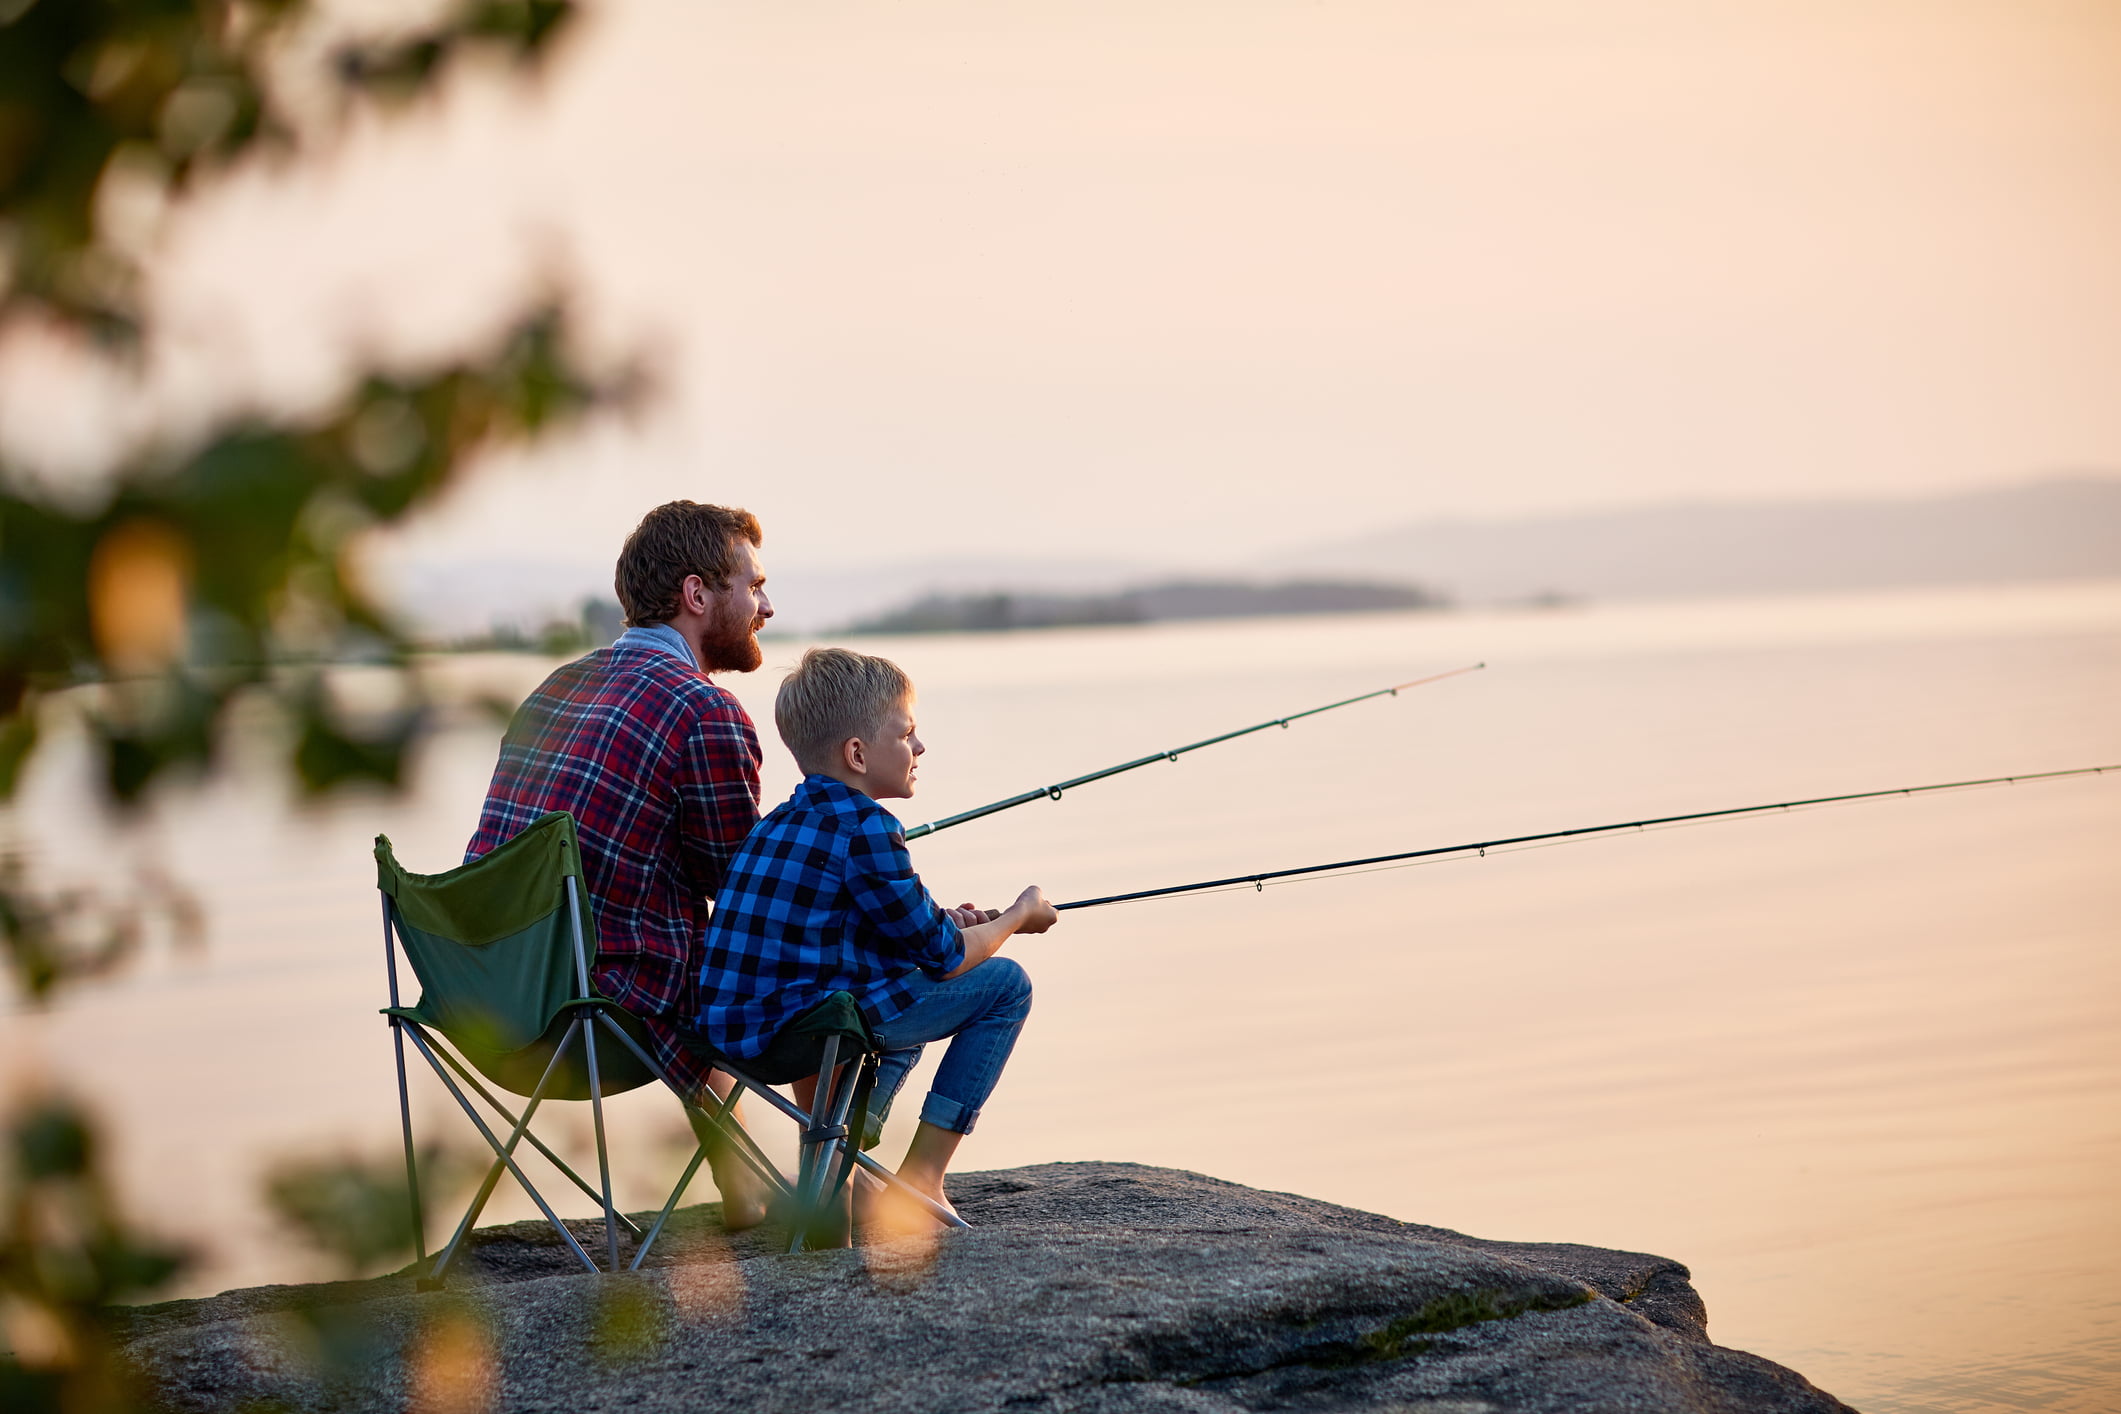 6 Fun Outdoor Activities to Try with Your Dad